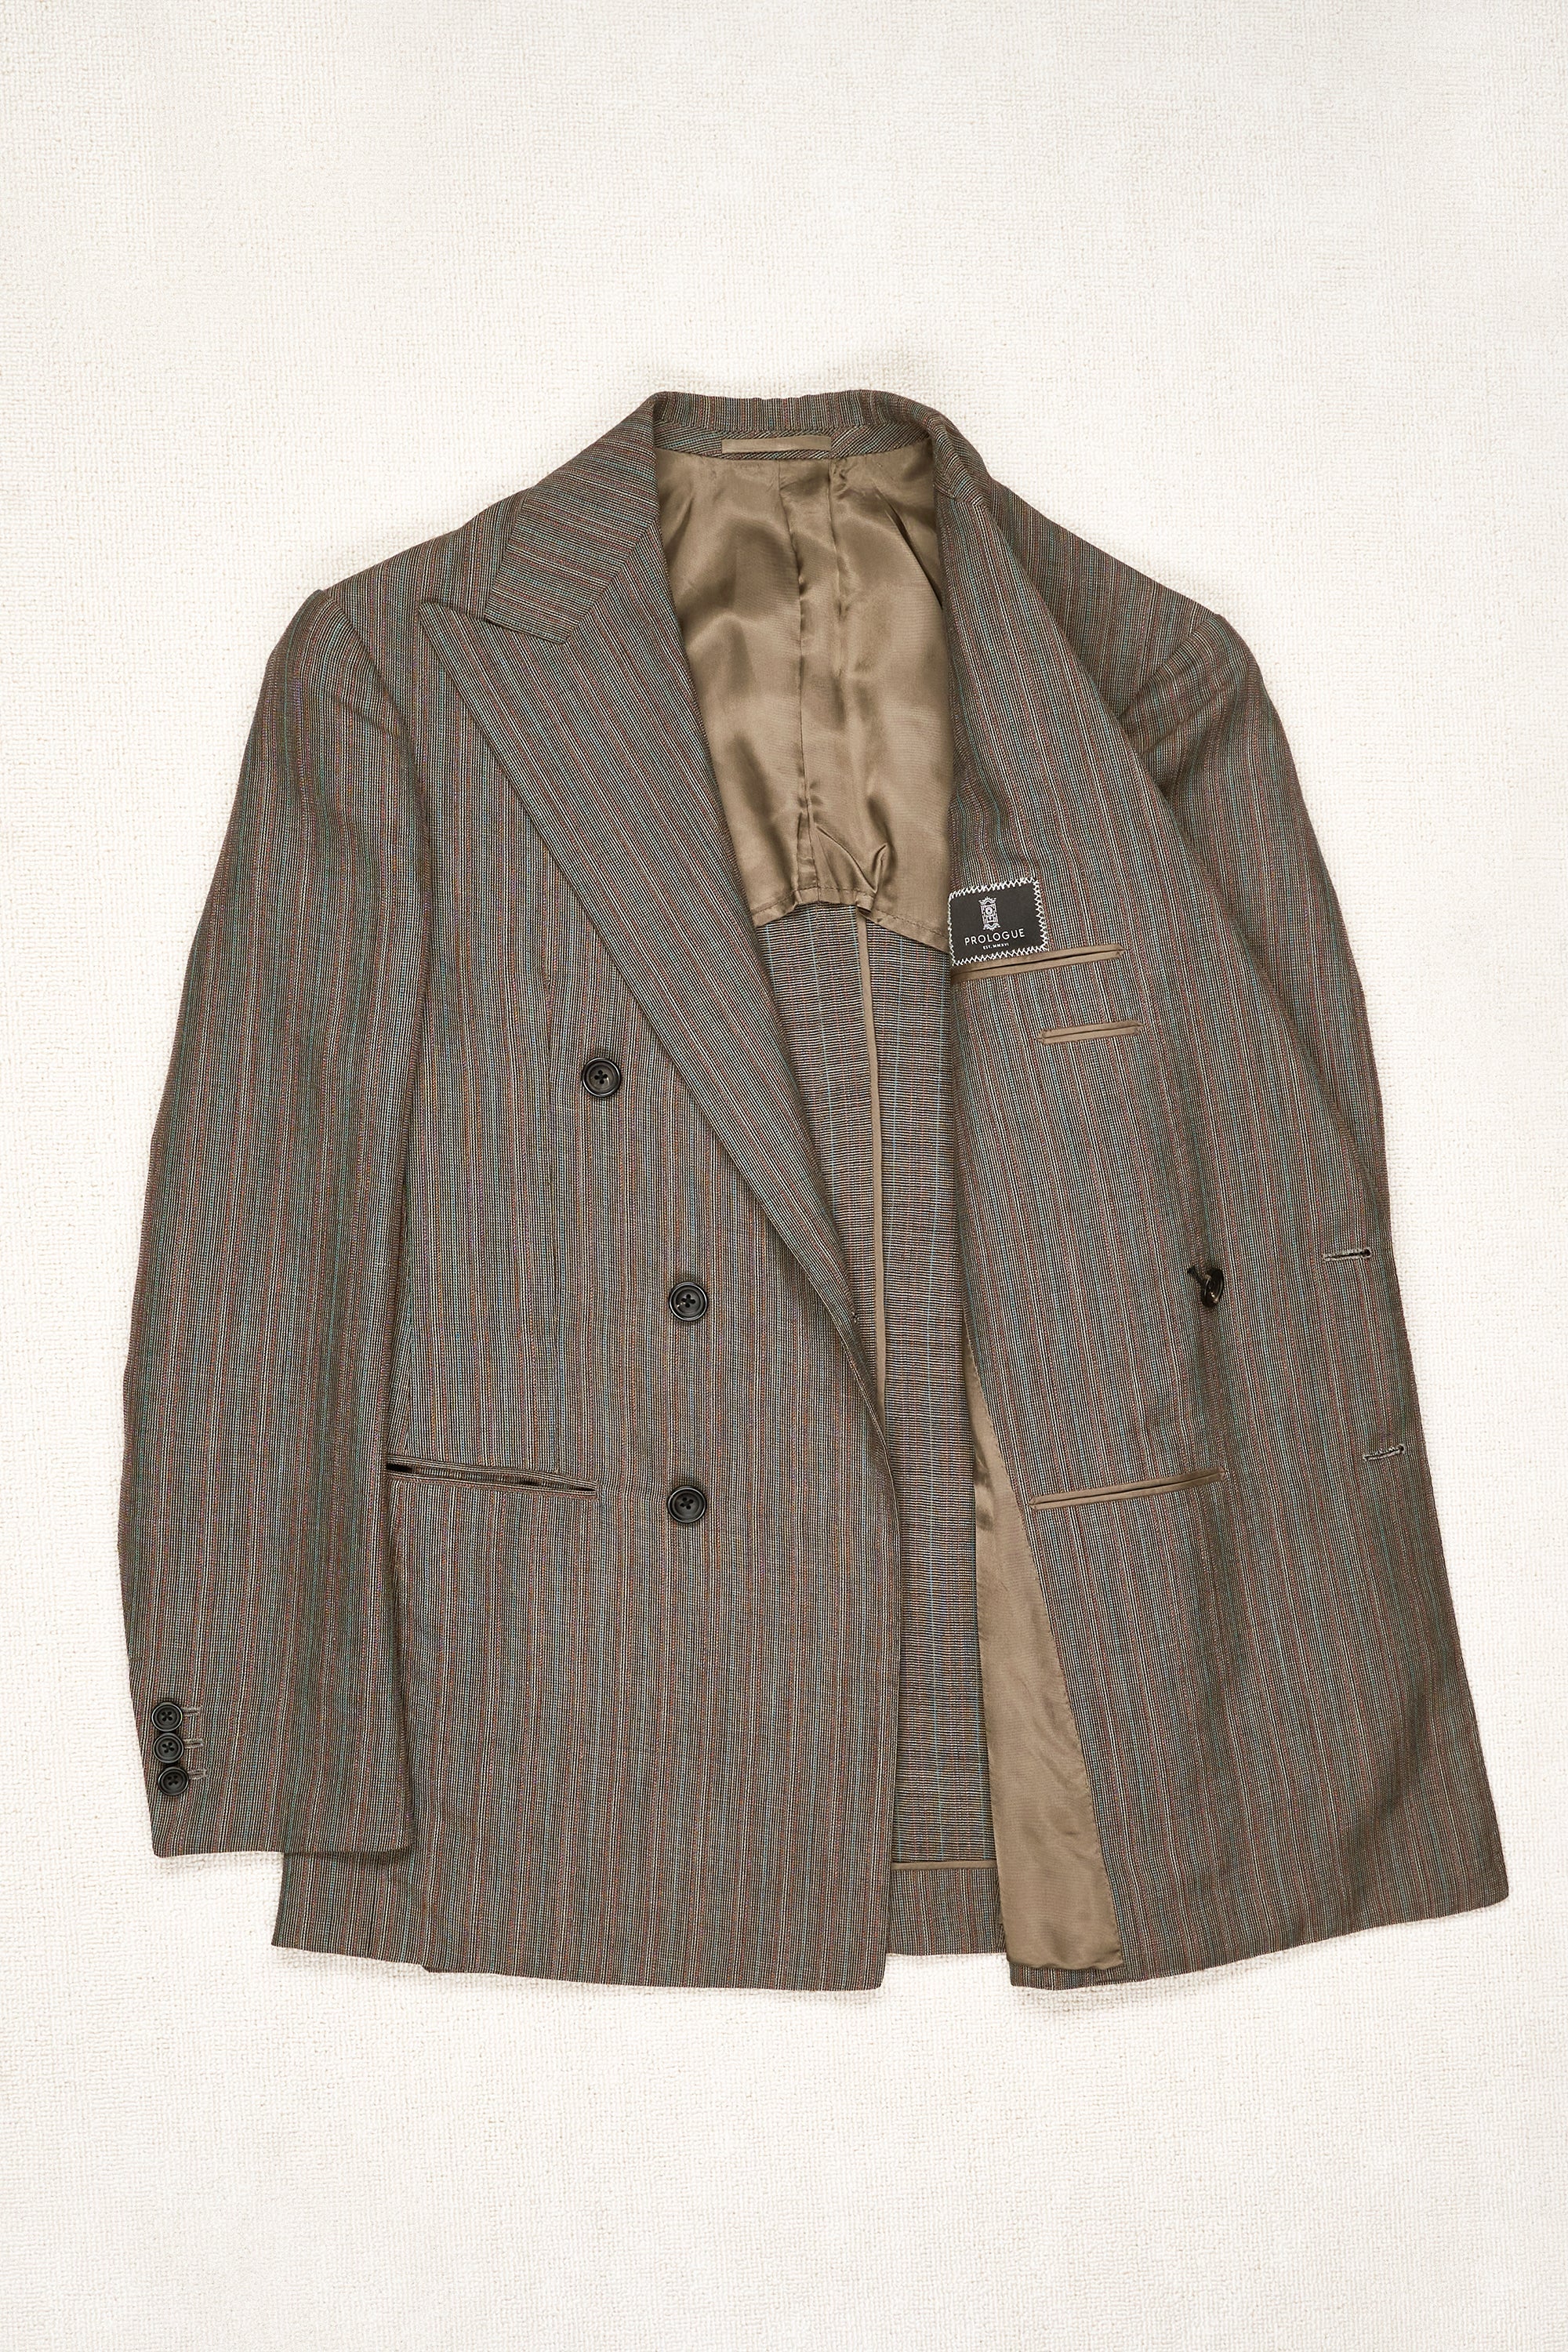 Prologue Brown with Red/Aqua Mohair/Wool Double Breasted Suit